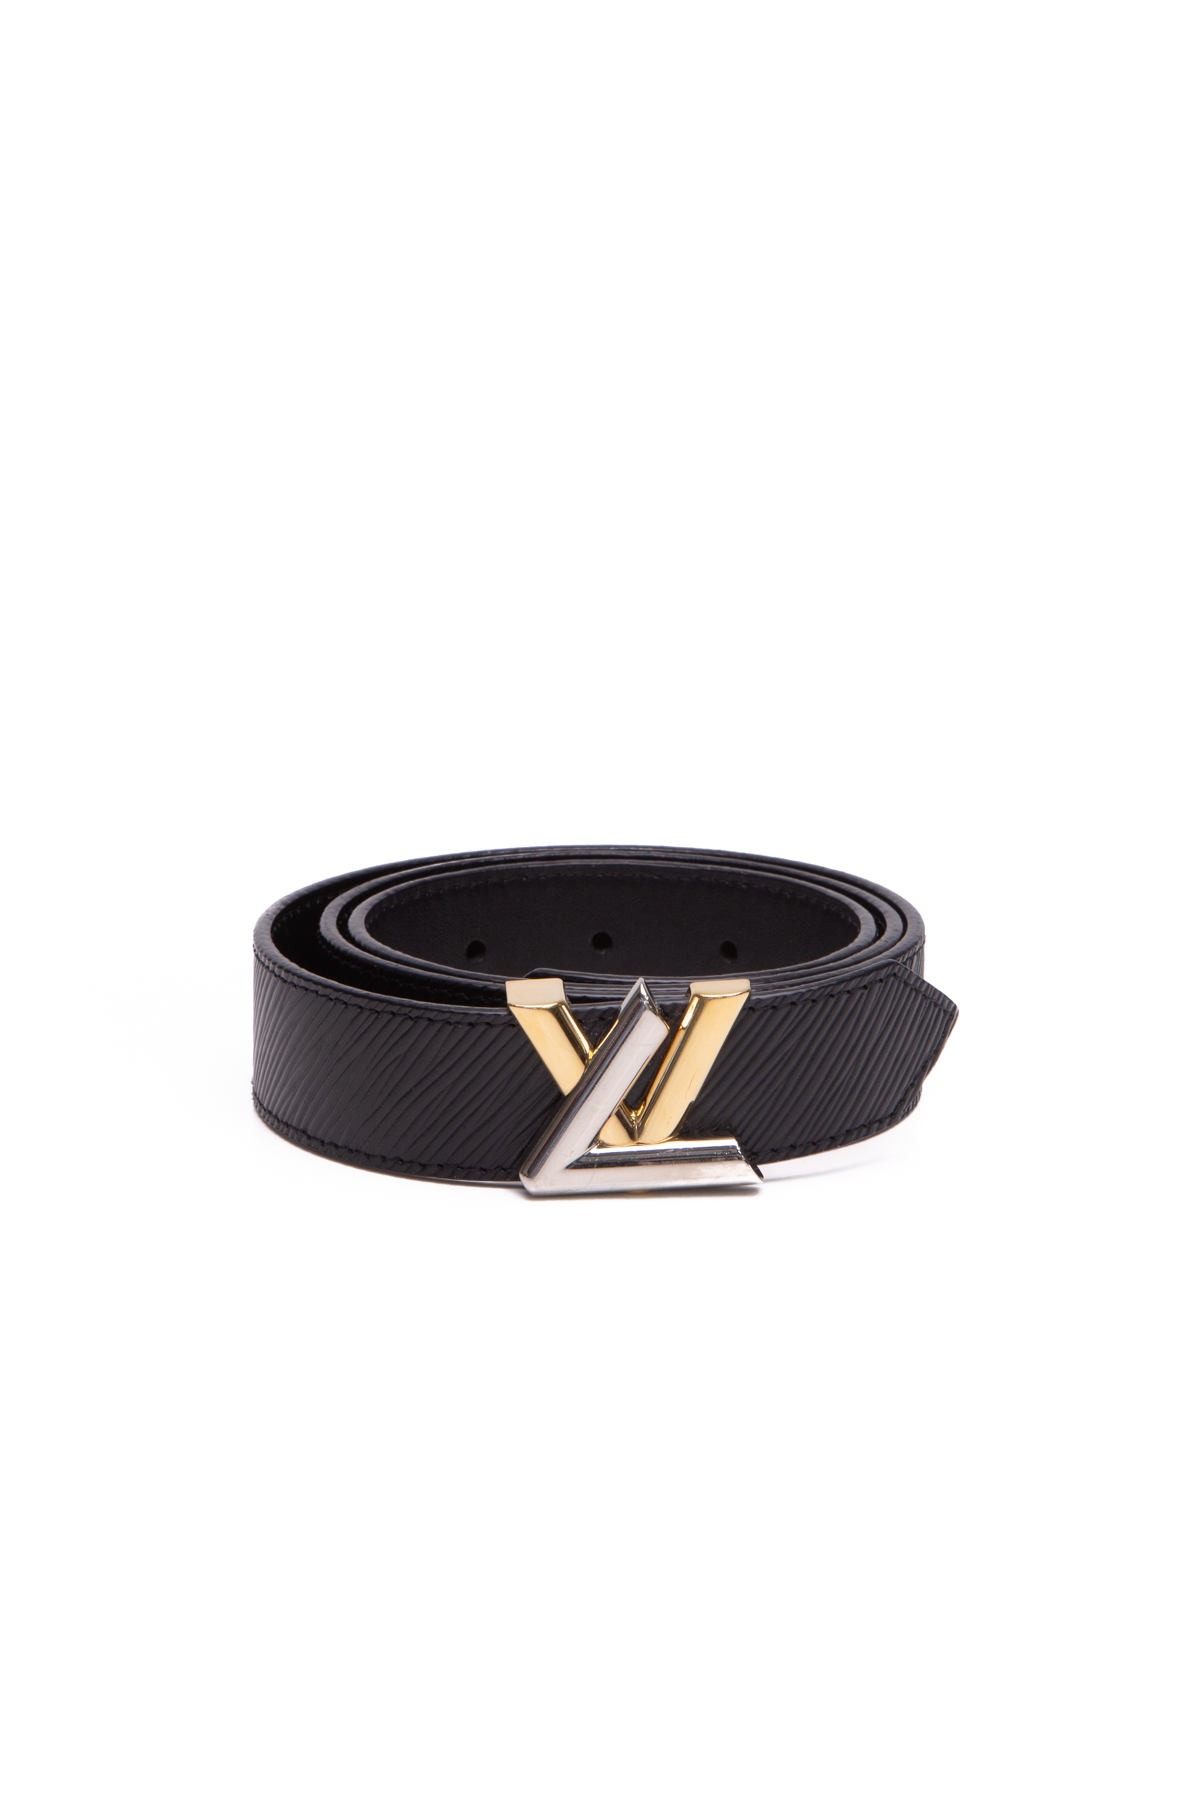 Louis Vuitton Black Epi Leather Lv Initiales Belt (size 90) in Brown